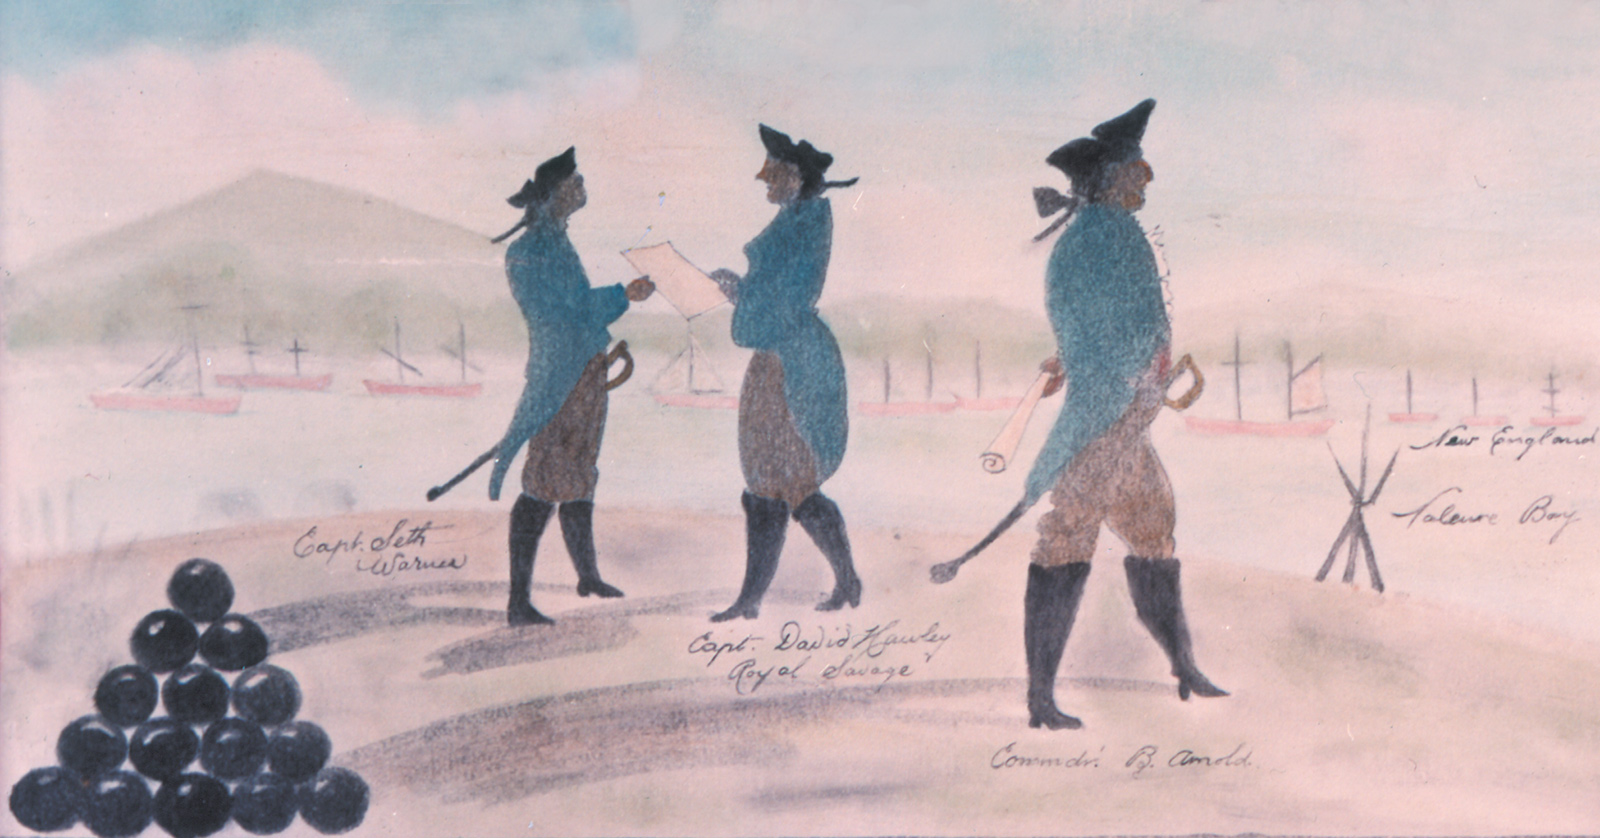 Benedict Arnold (right) and other American officers at the Battle of Valcour Island, Lake Champlain, October 1776; detail of a drawing by Charles Randle, from Nathaniel Philbrick’s Valiant Ambition 